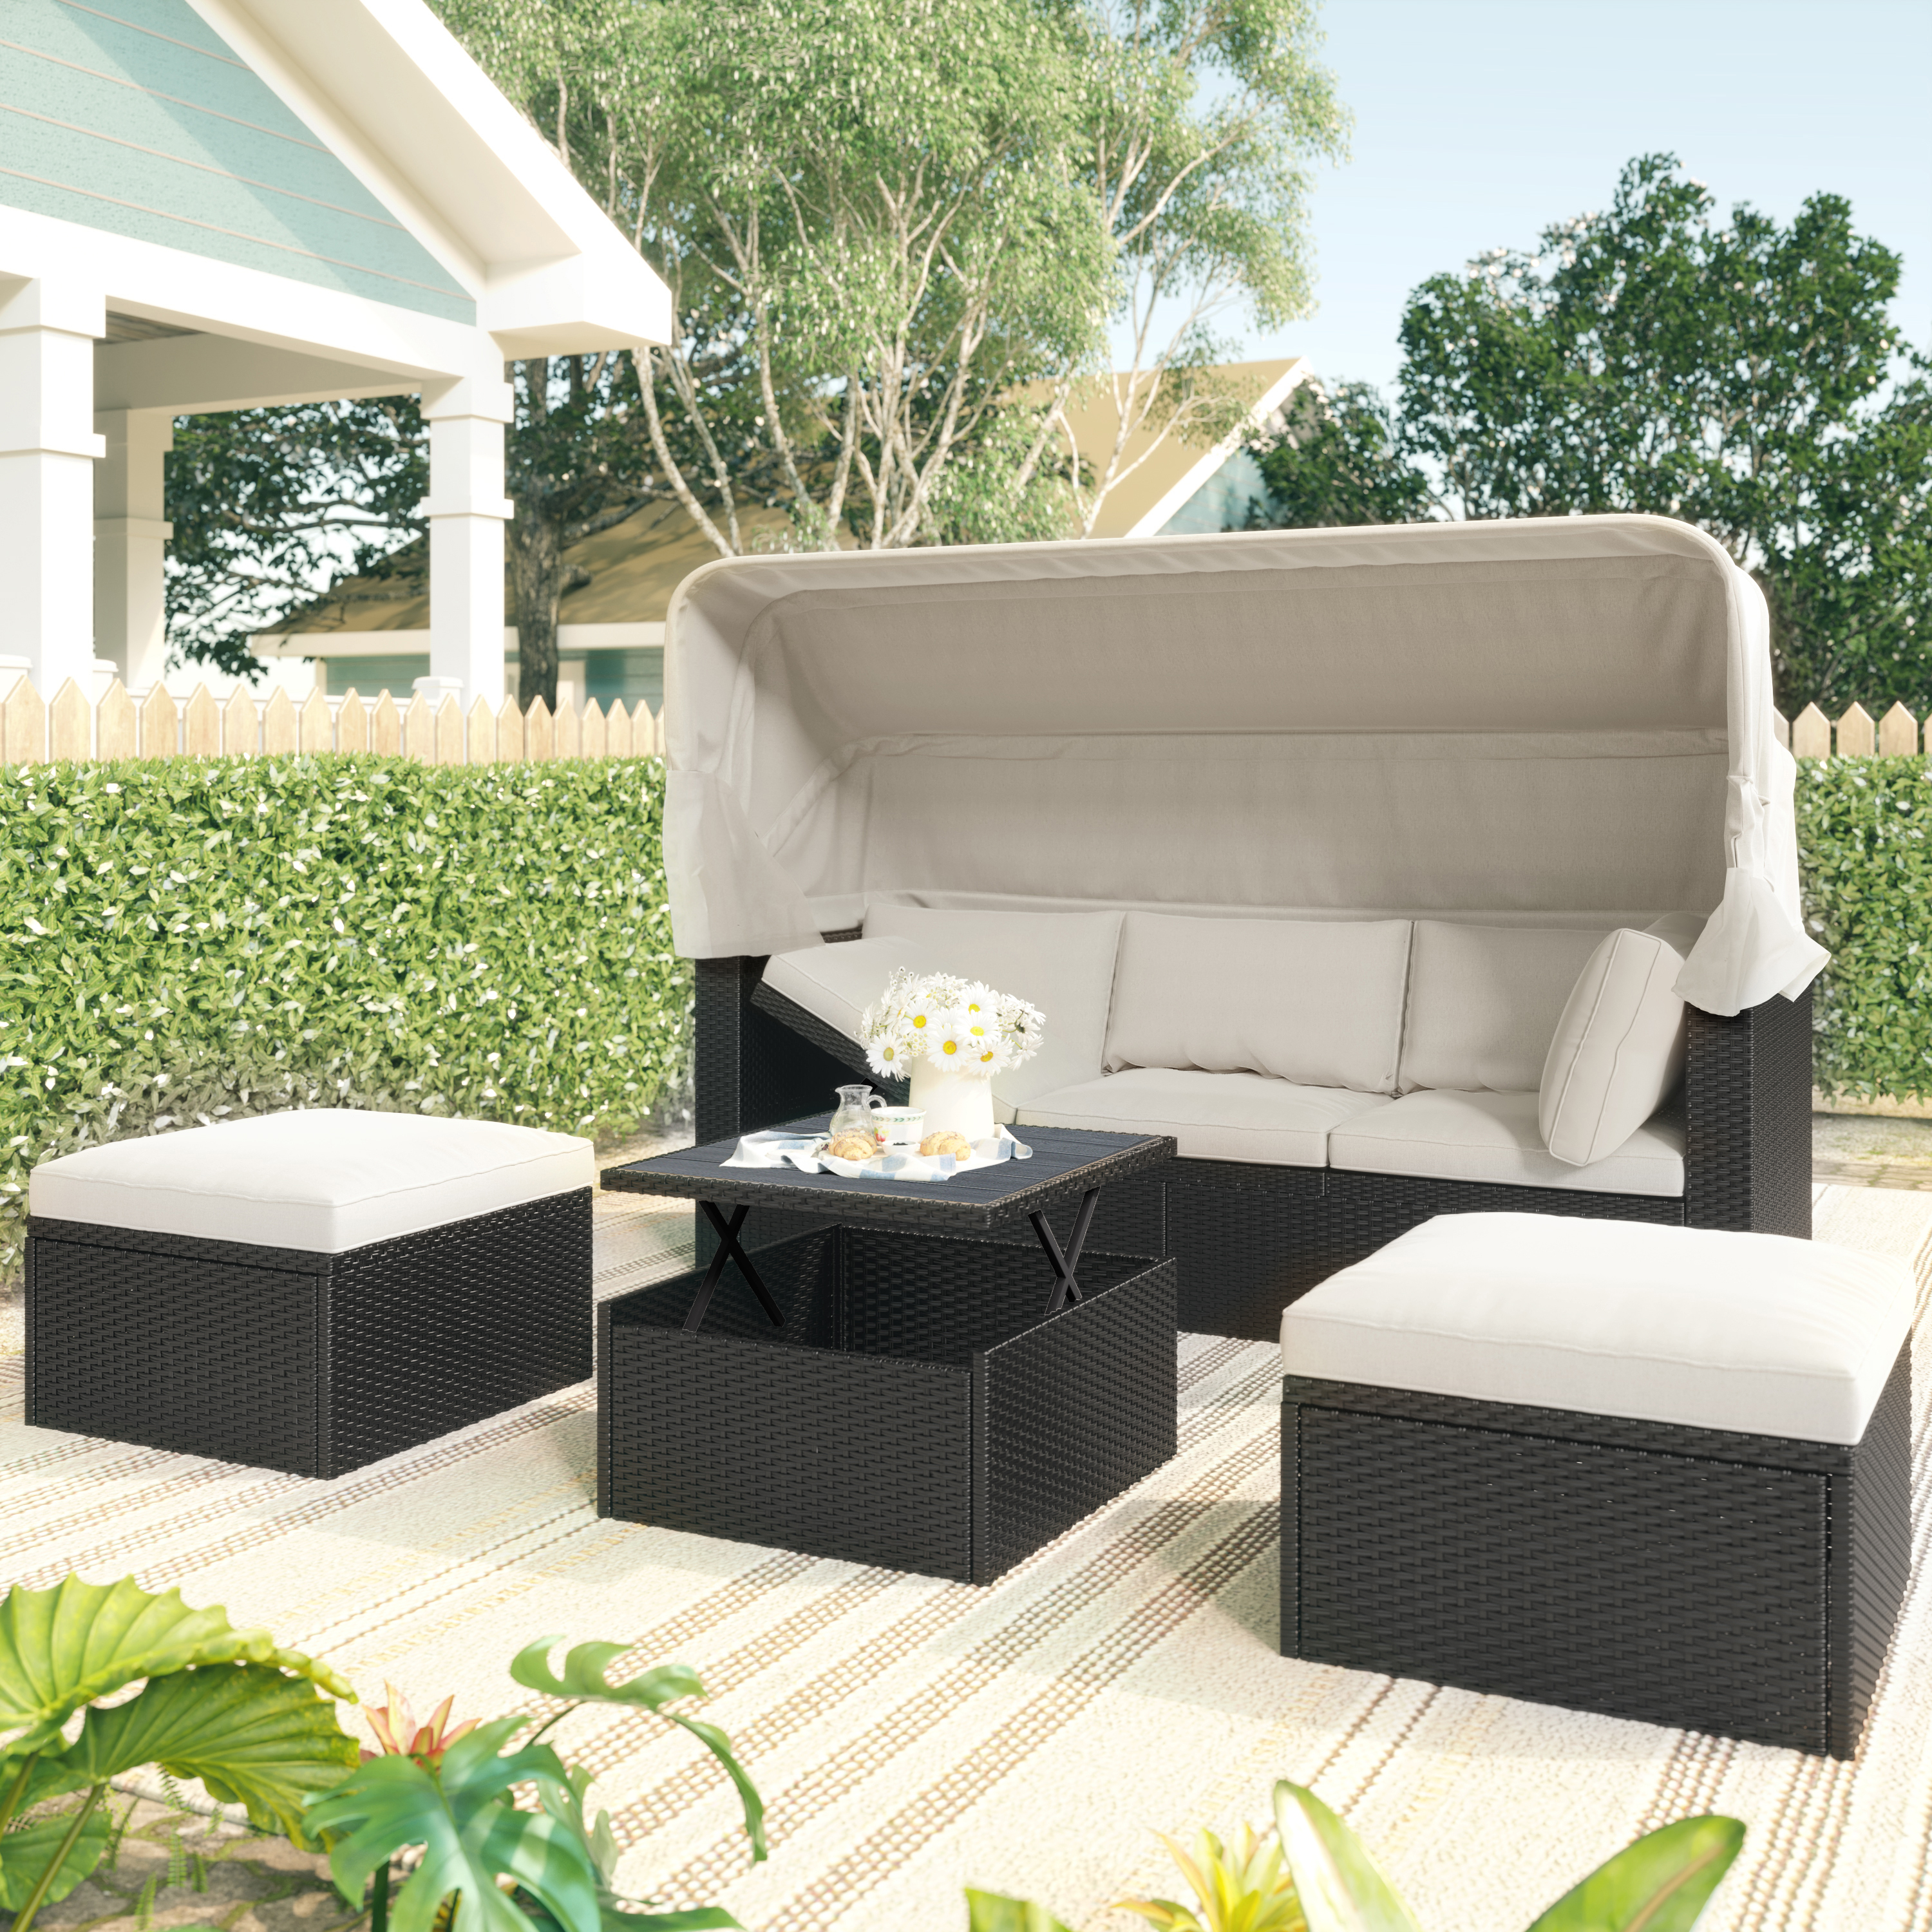 Outdoor Patio Rectangle Daybed with Retractable Canopy,  Wicker Furniture Sectional Seating with Washable Cushions, Backyard, Porch-Boyel Living